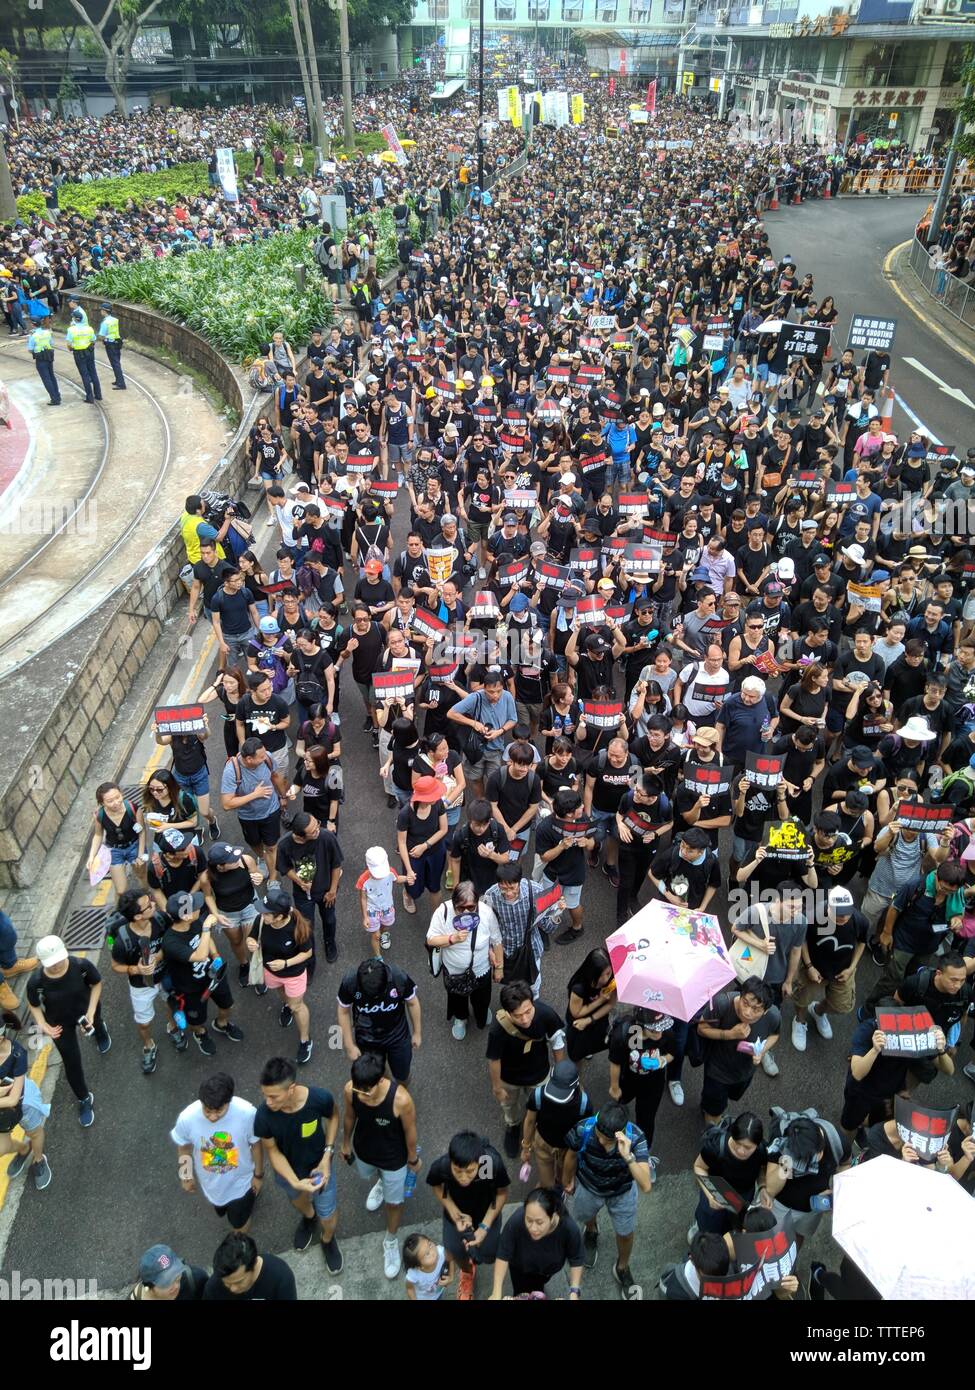 Hong Kong, 16 June 2019 - Protest crowd in Causeway Bay of Hong Kong, against the extradition law of government. Stock Photo